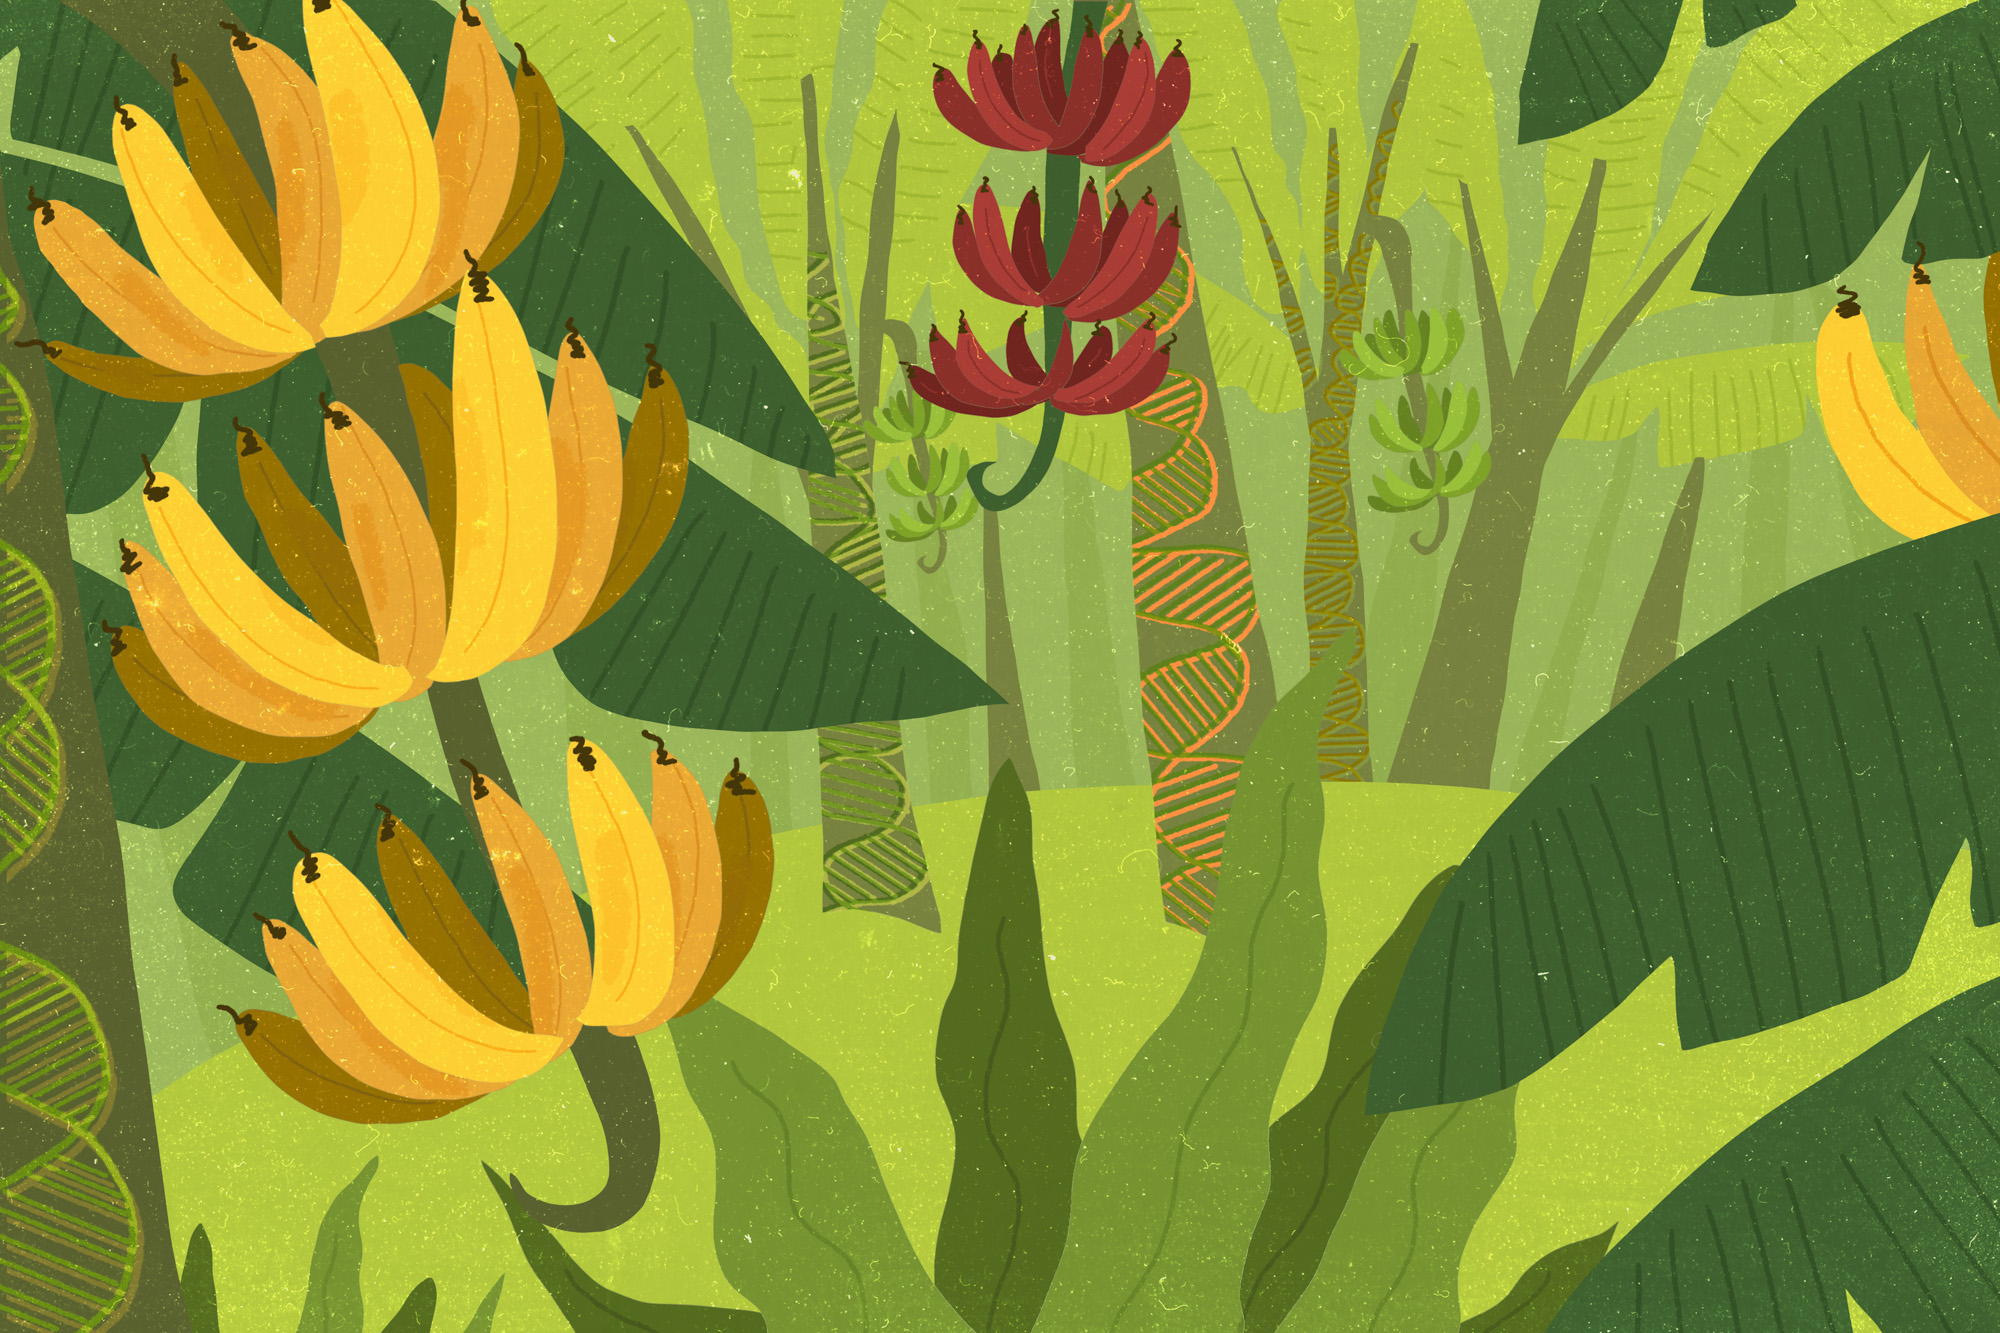 Illustration of colored bananas in a forest, with DNA etchings in the bark of the trees